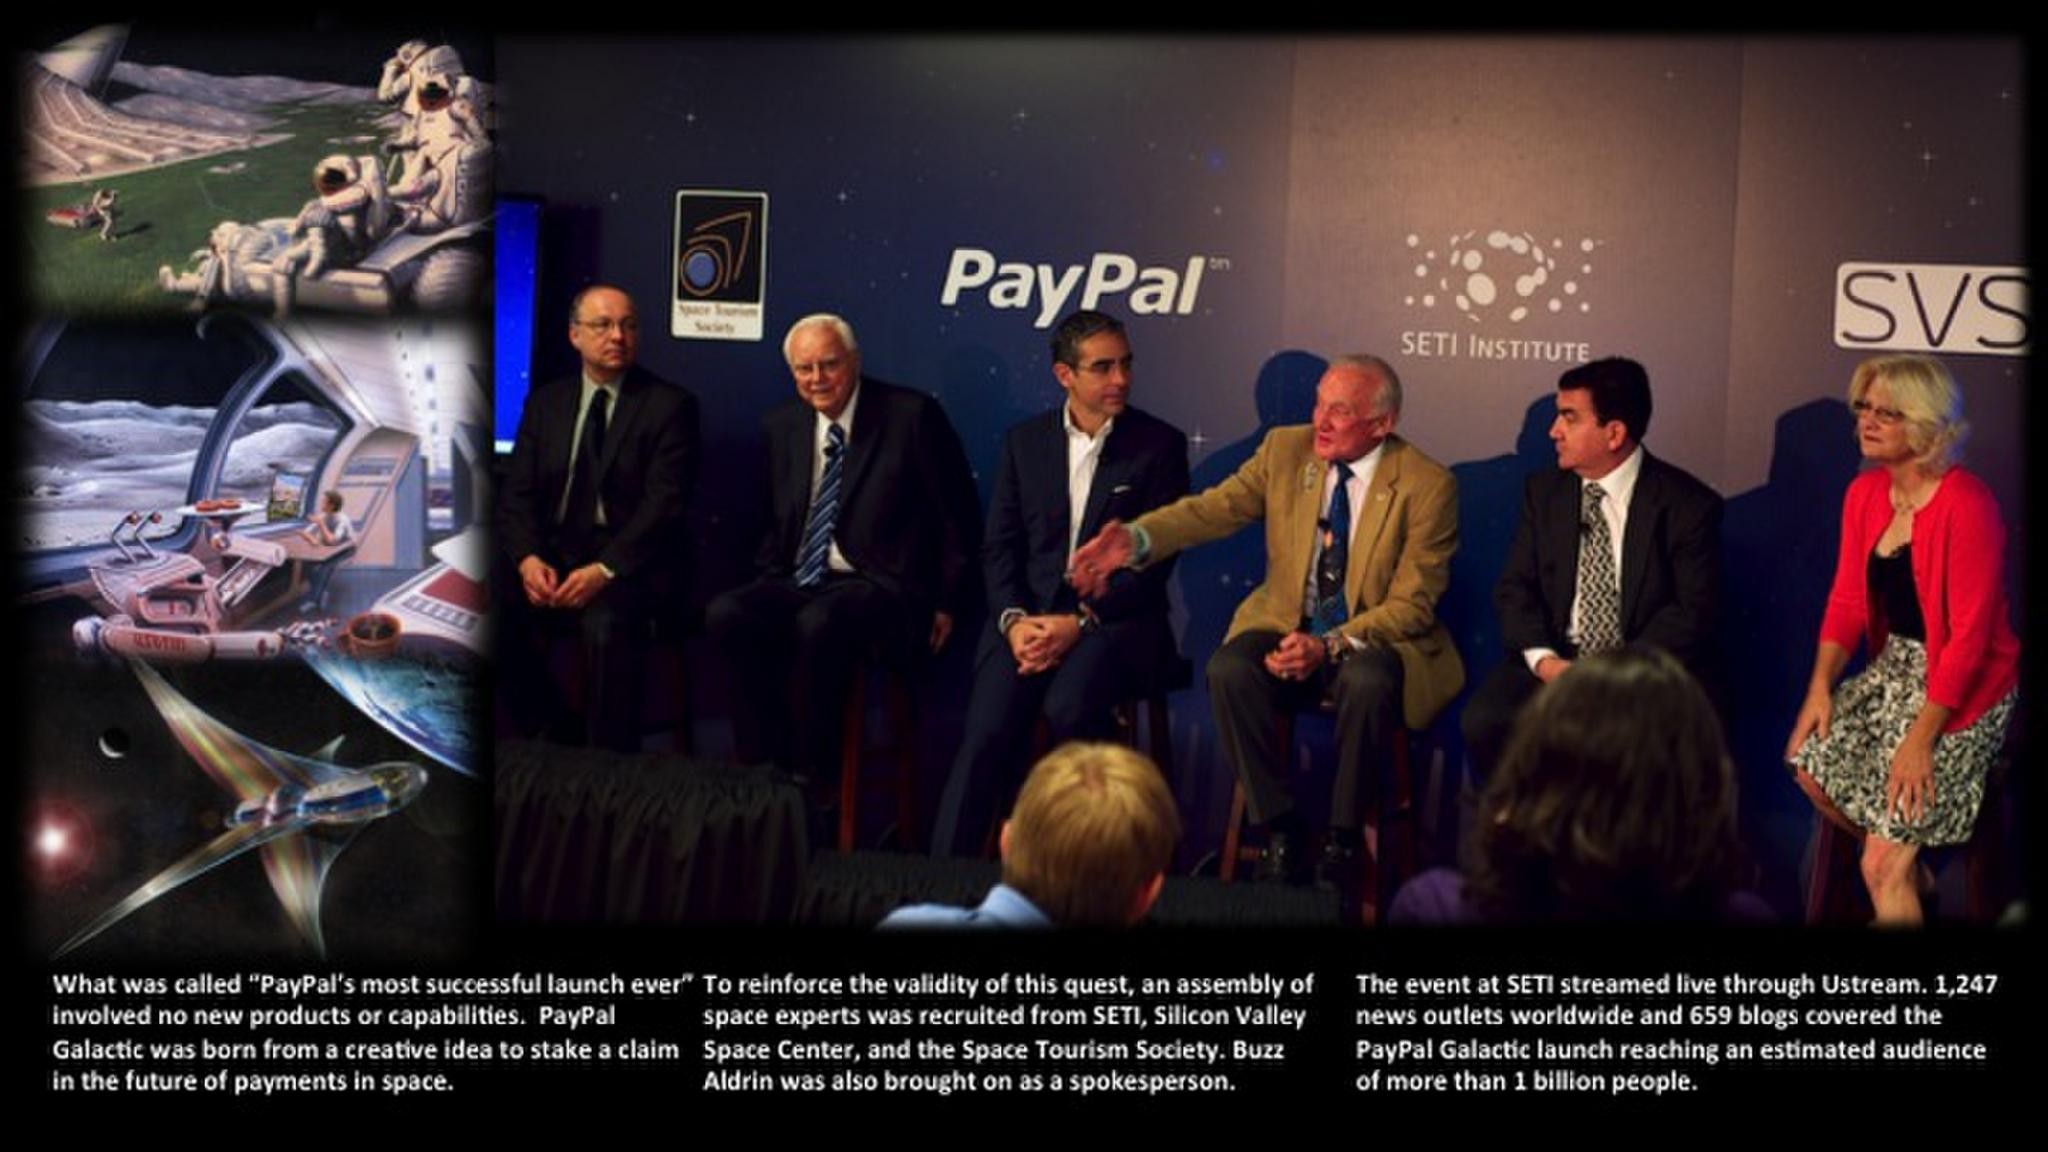 PAYPAL GALACTIC: A BOLD NEW INITIATIVE